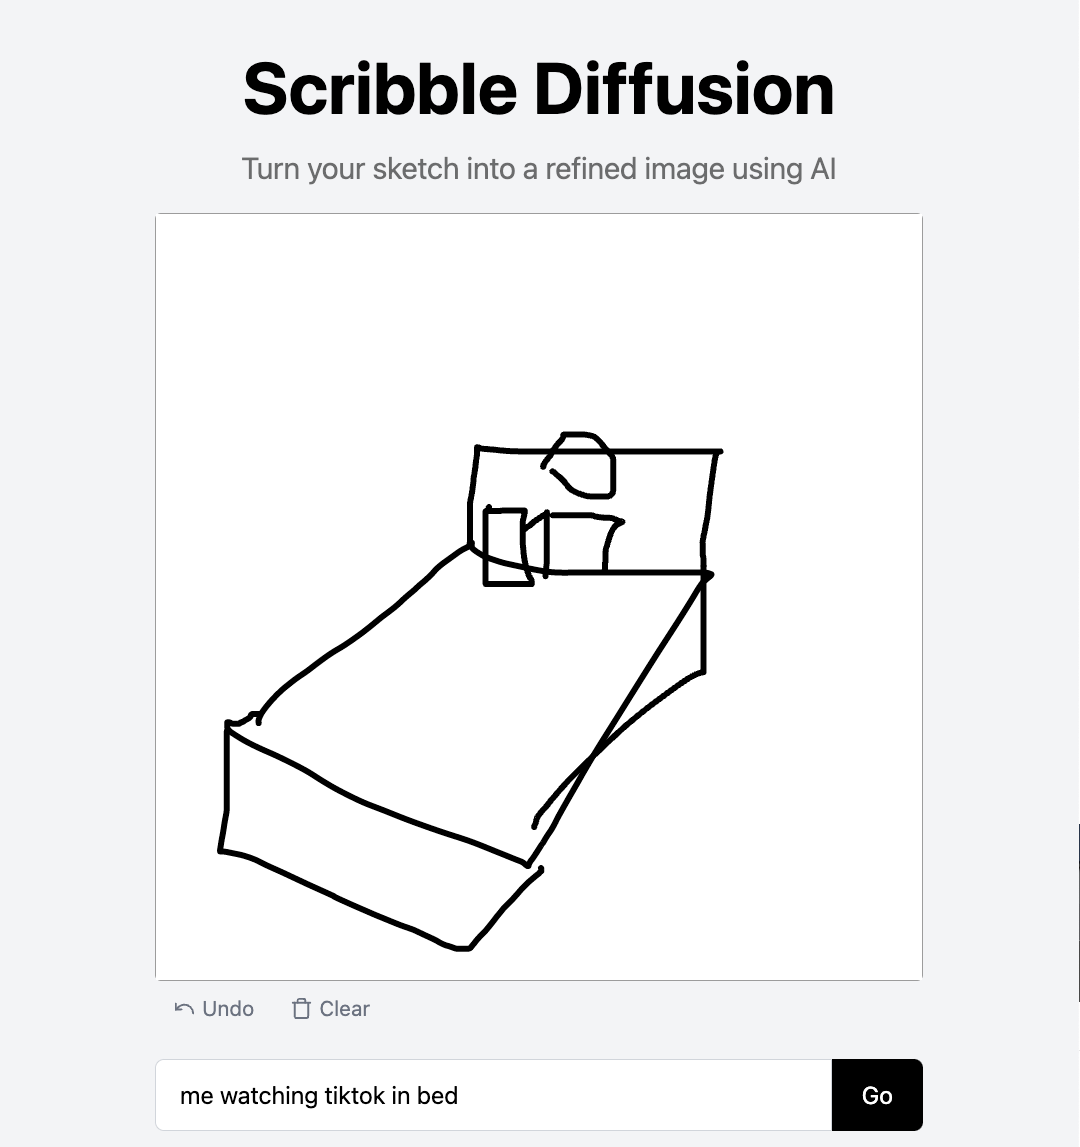 From Sketch to Masterpiece: How ScribbleDiffusion.com is Redefining the Art of Digital Image Editing